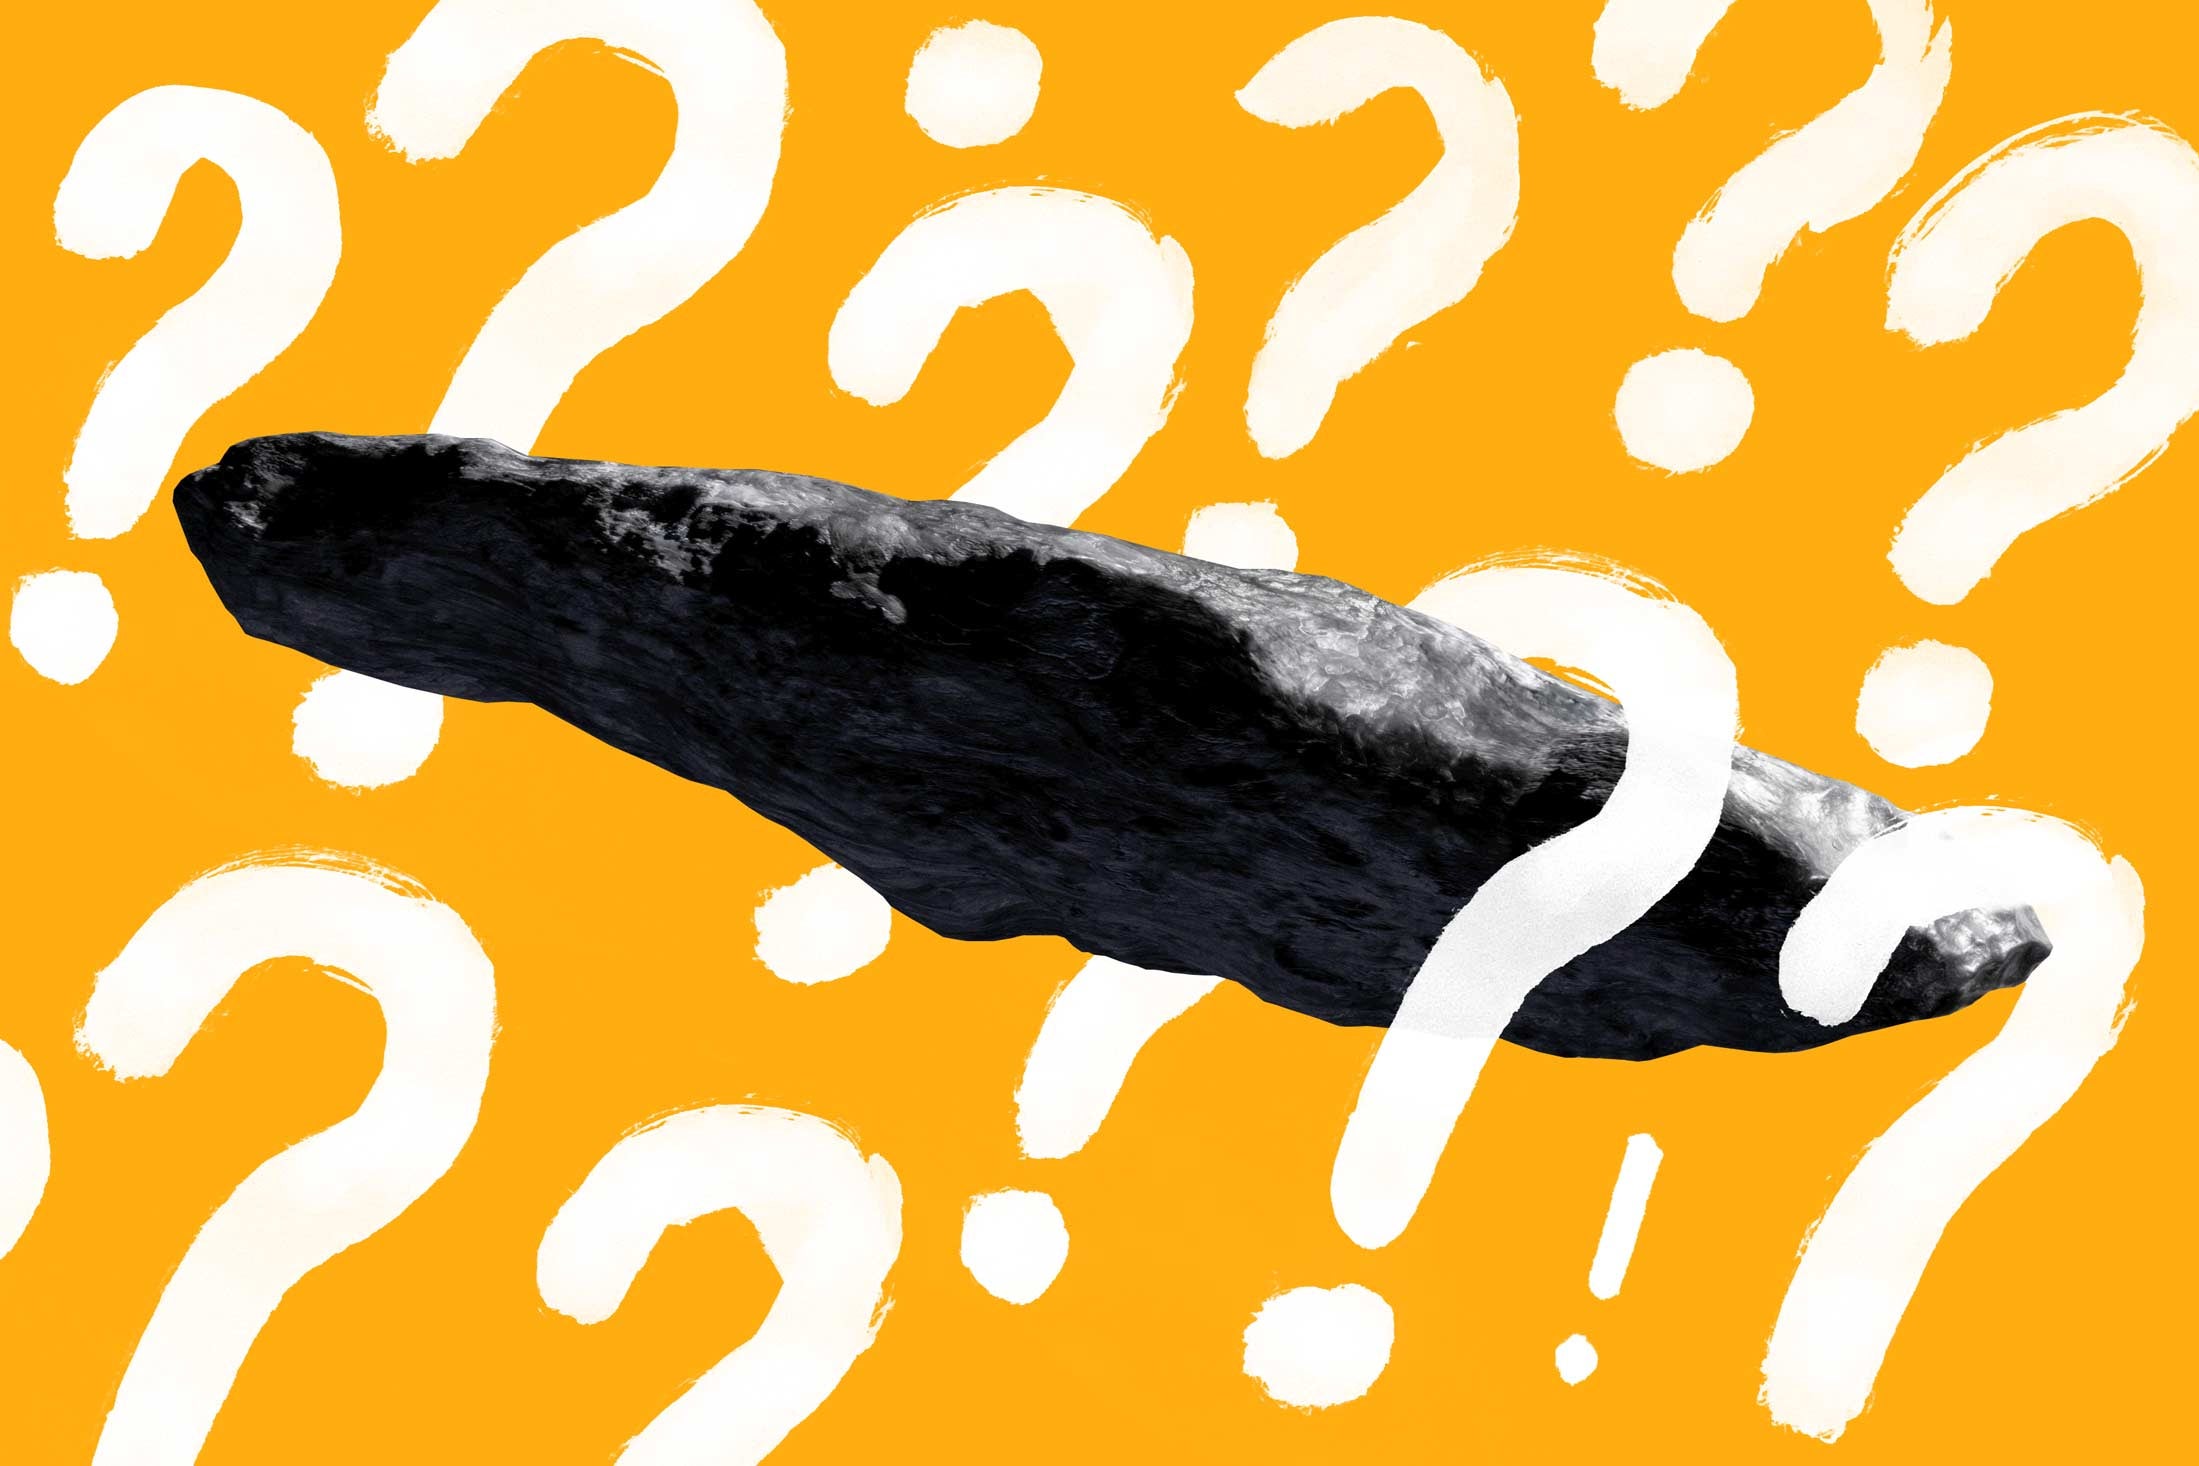 ‘Oumuamua (a very large, slender gray rock) surrounded by question marks and an exclamation point.